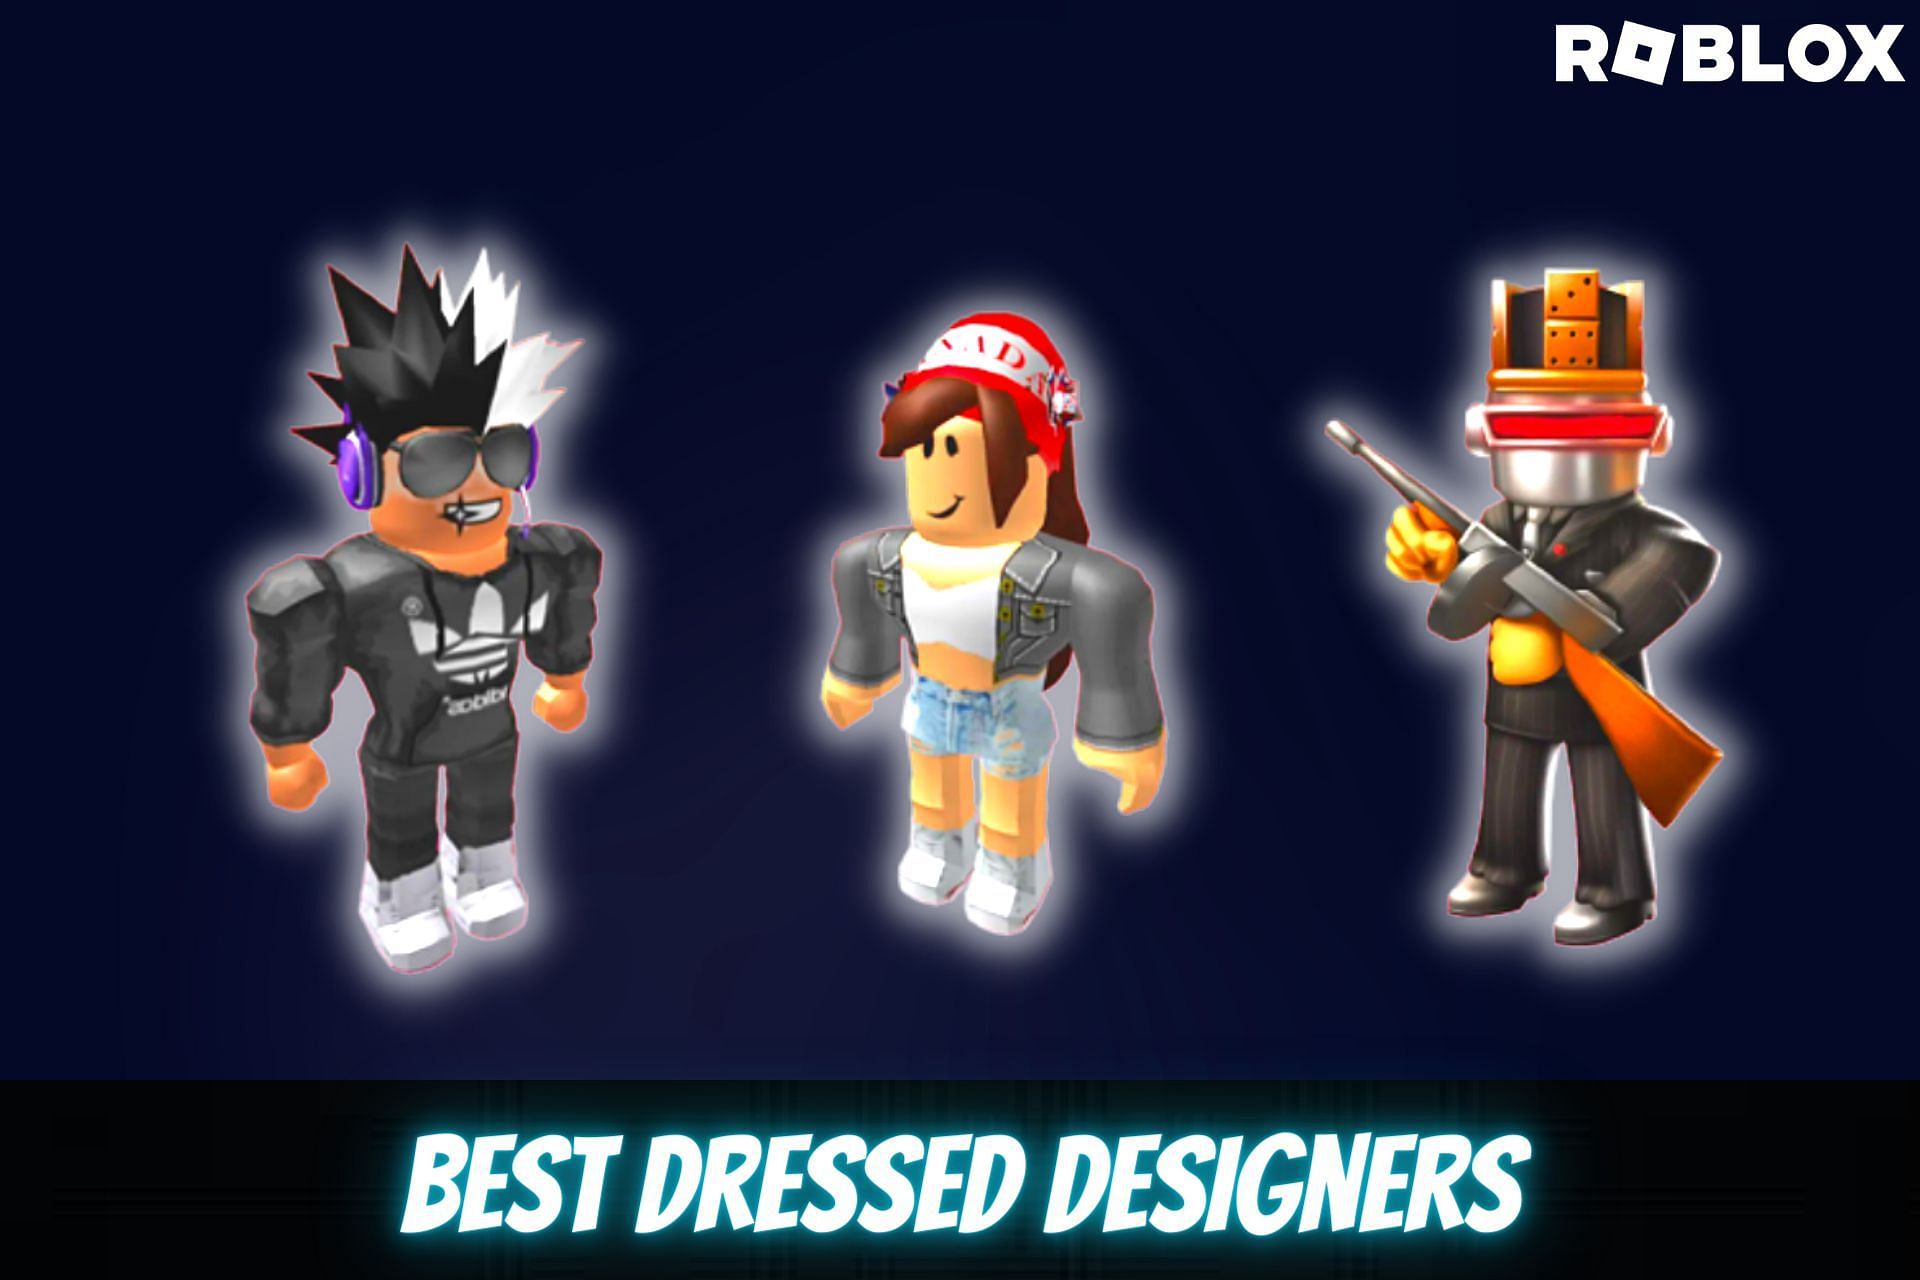 Fashion Your Roblox Avatar: How to Make Stylish Clothing Creations